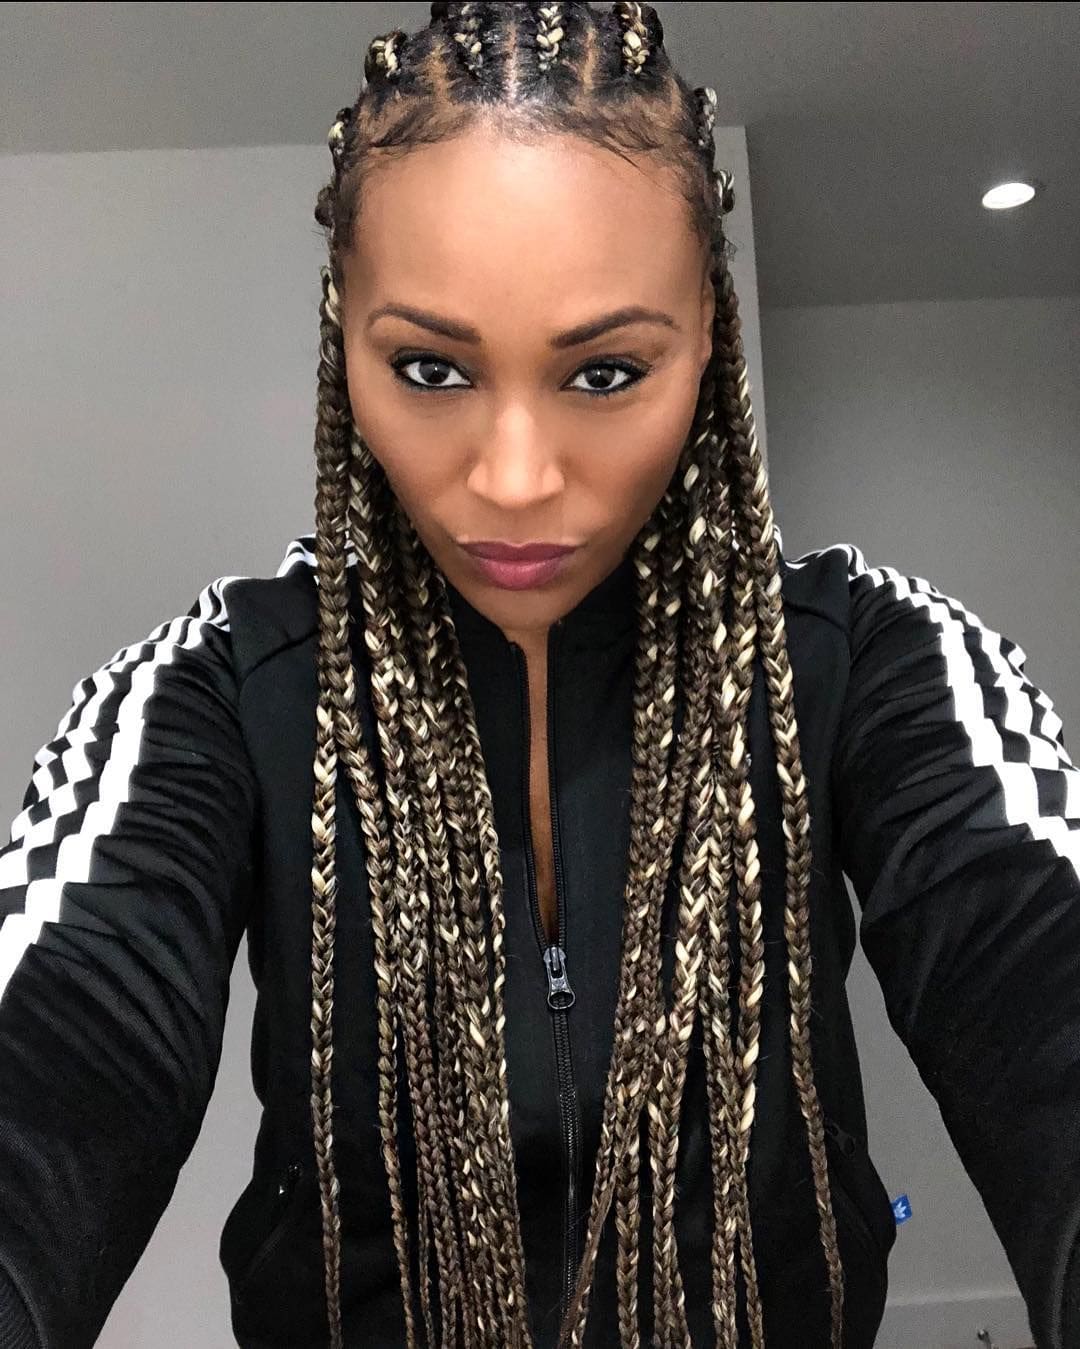 Cynthia Bailey Tells Fans And Followers To Vote Because This Is The Most Important Election Of Our Time